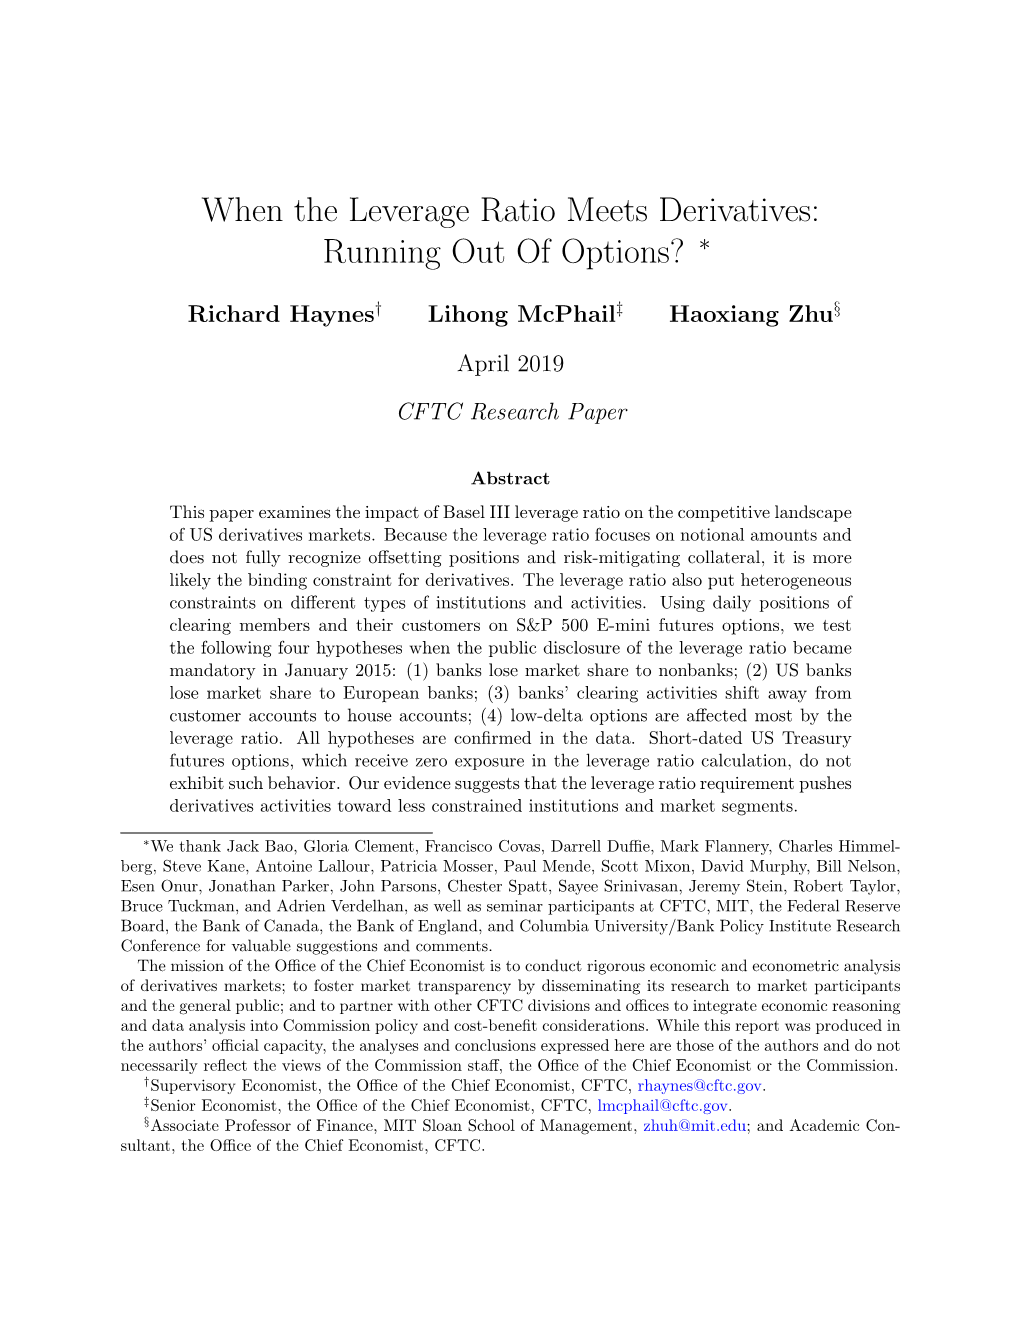 When the Leverage Ratio Meets Derivatives: Running out of Options? ∗